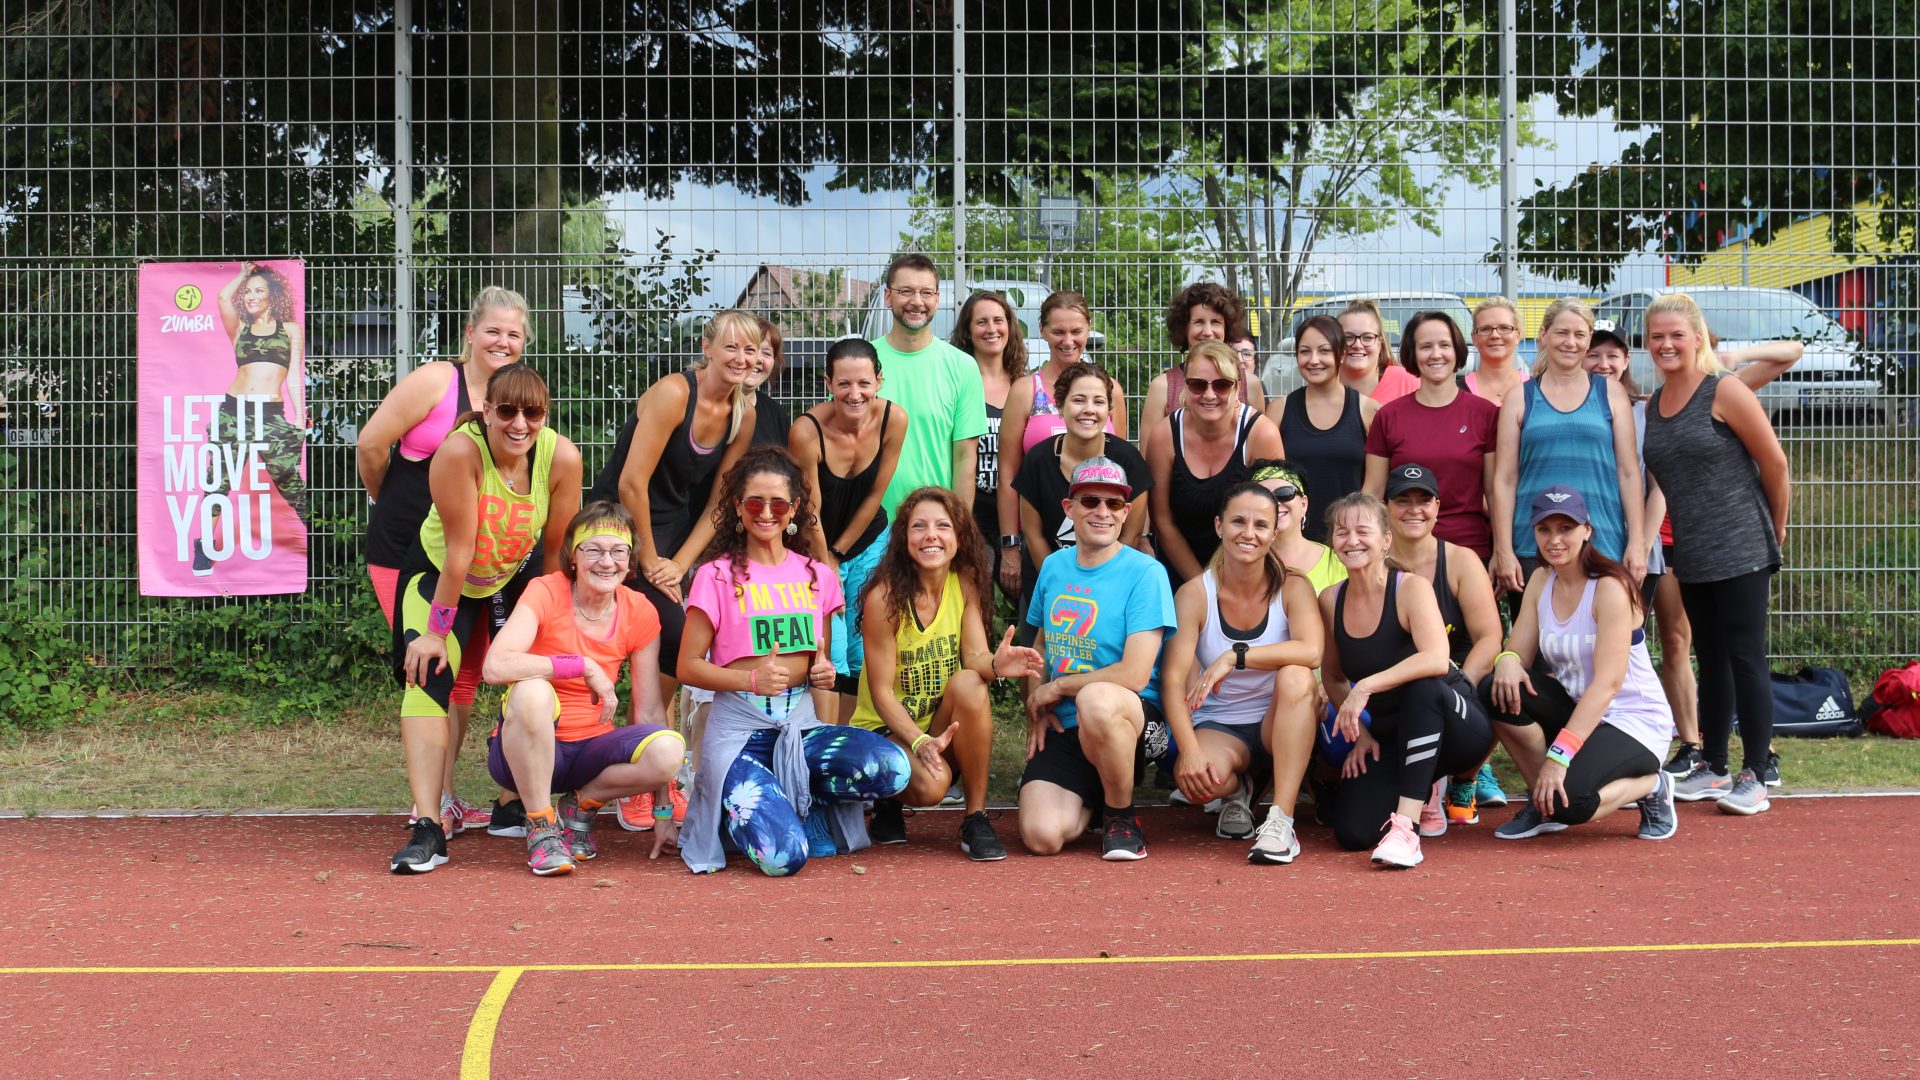 Tolle Zumba- und Fitness-Party trotz Unwetter